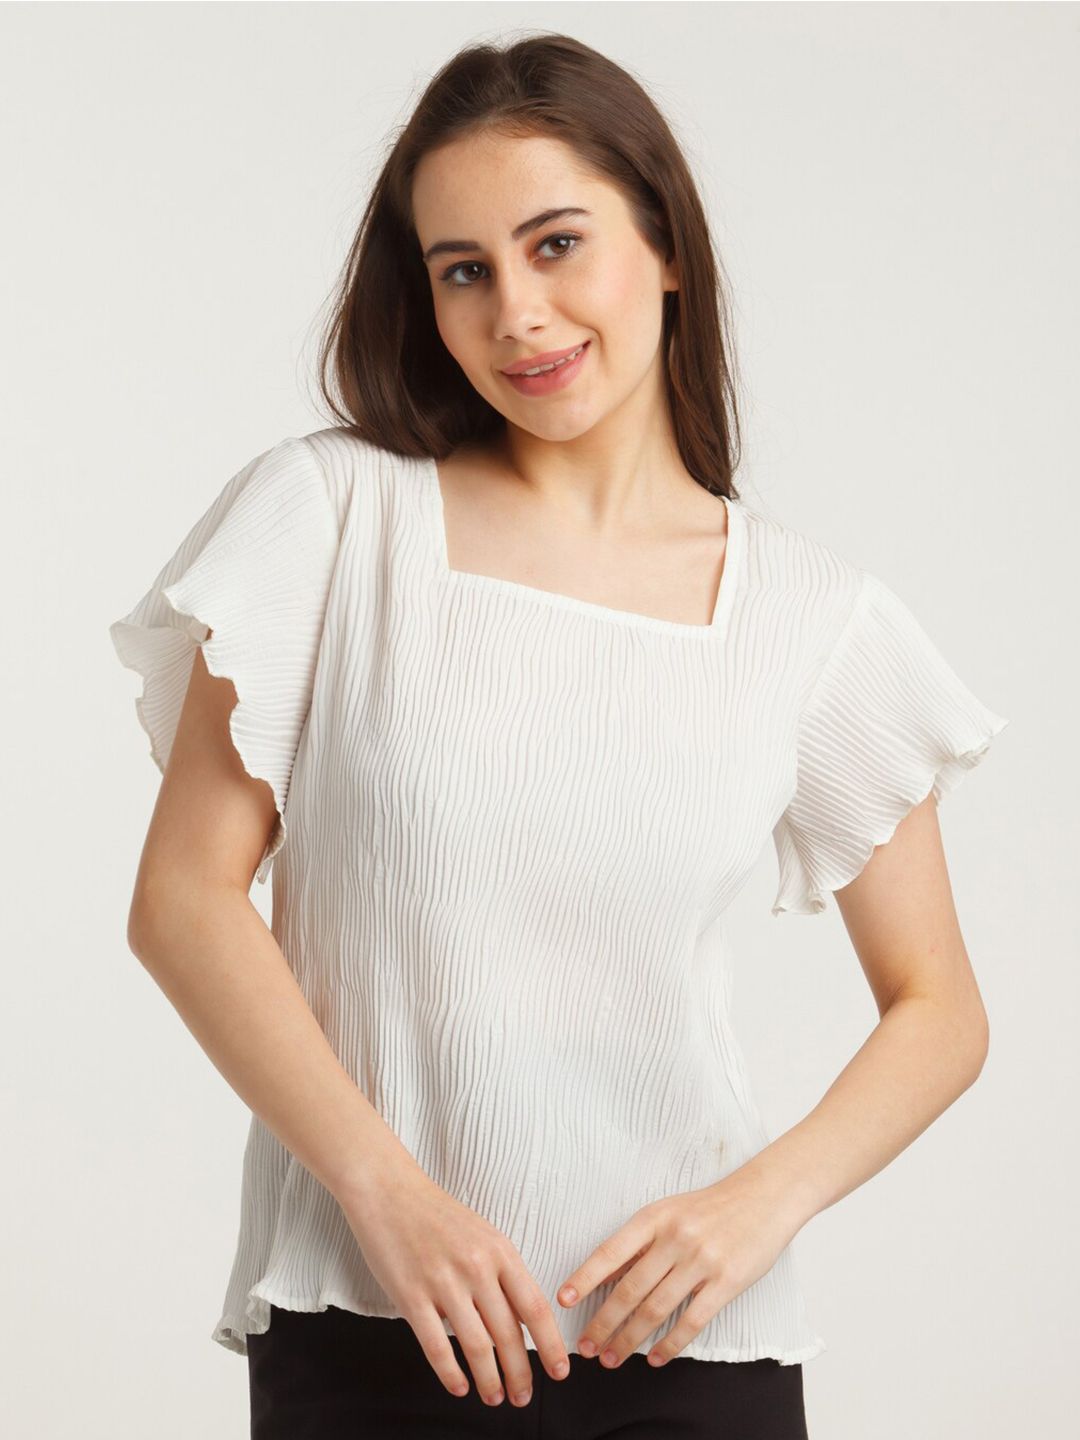 Zink London White Solid Flared Sleeve Top Price in India